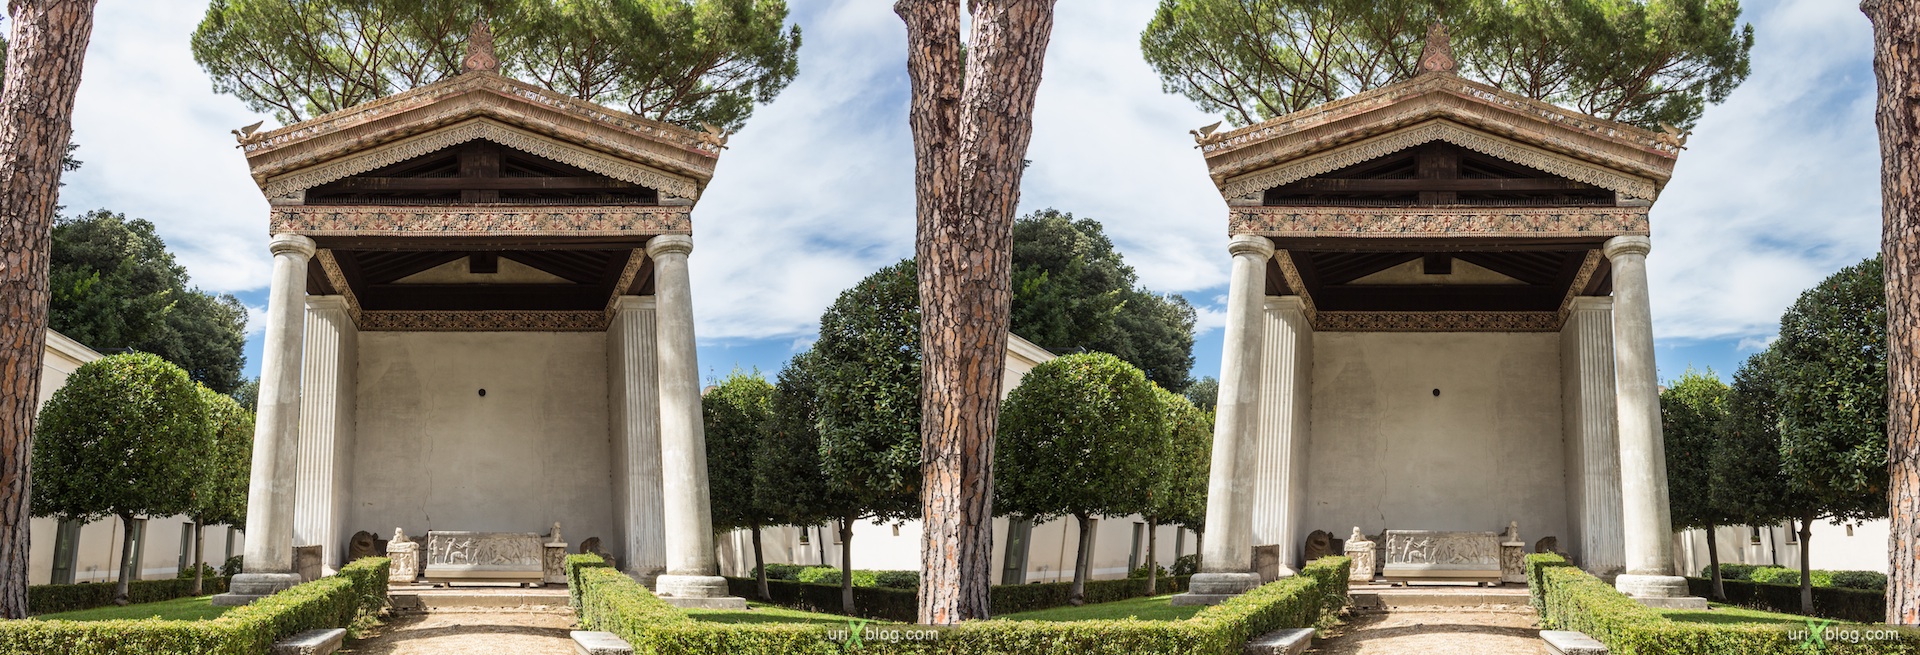 2012, Villa Giulia, Etruscan Museum, Rome, Italy, 3D, stereo pair, cross-eyed, crossview, cross view stereo pair